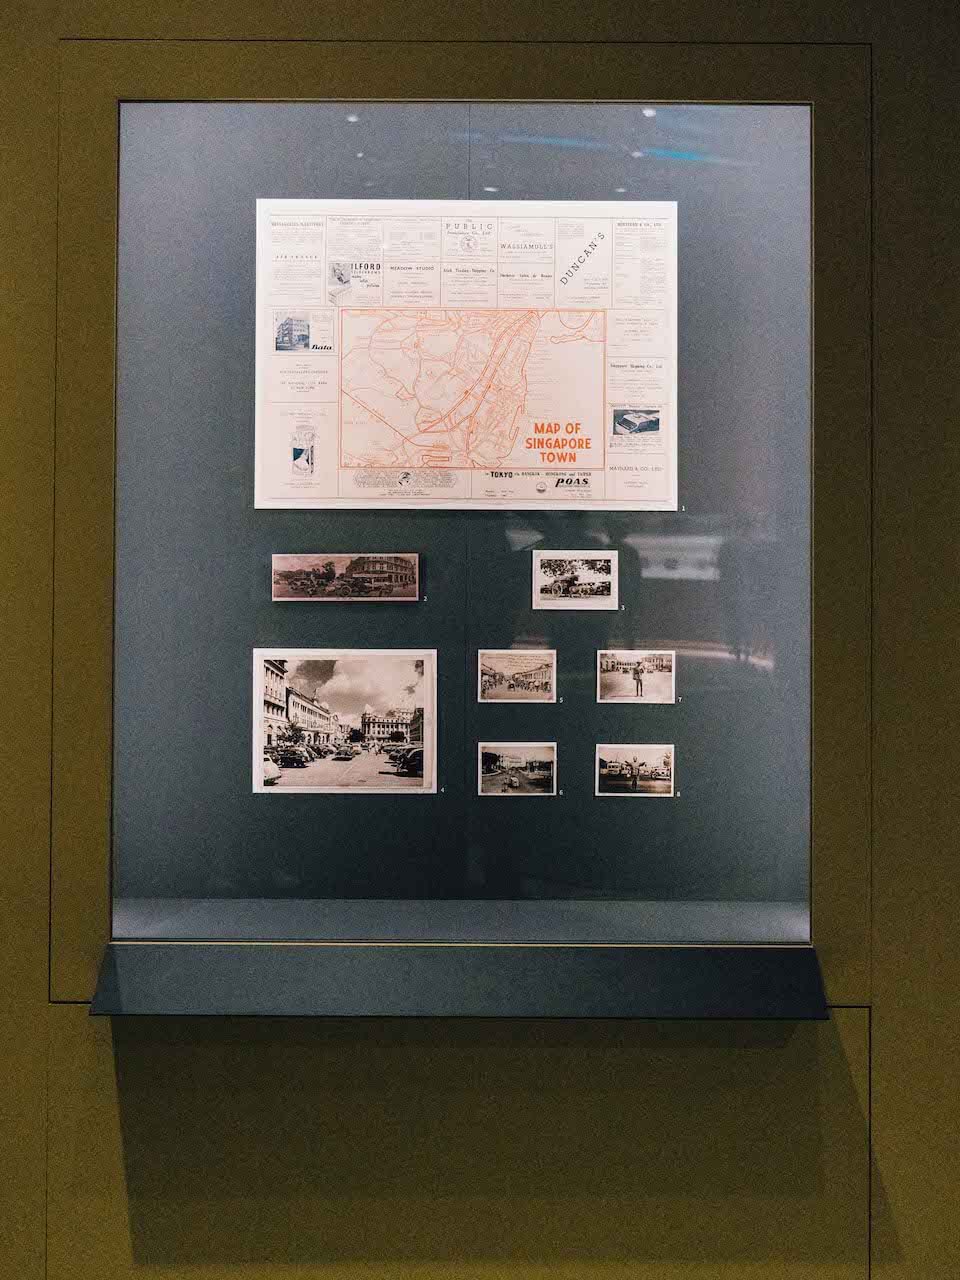 a tourist map and old photos of singapore on display at the travel exhibition located in national museum singapore